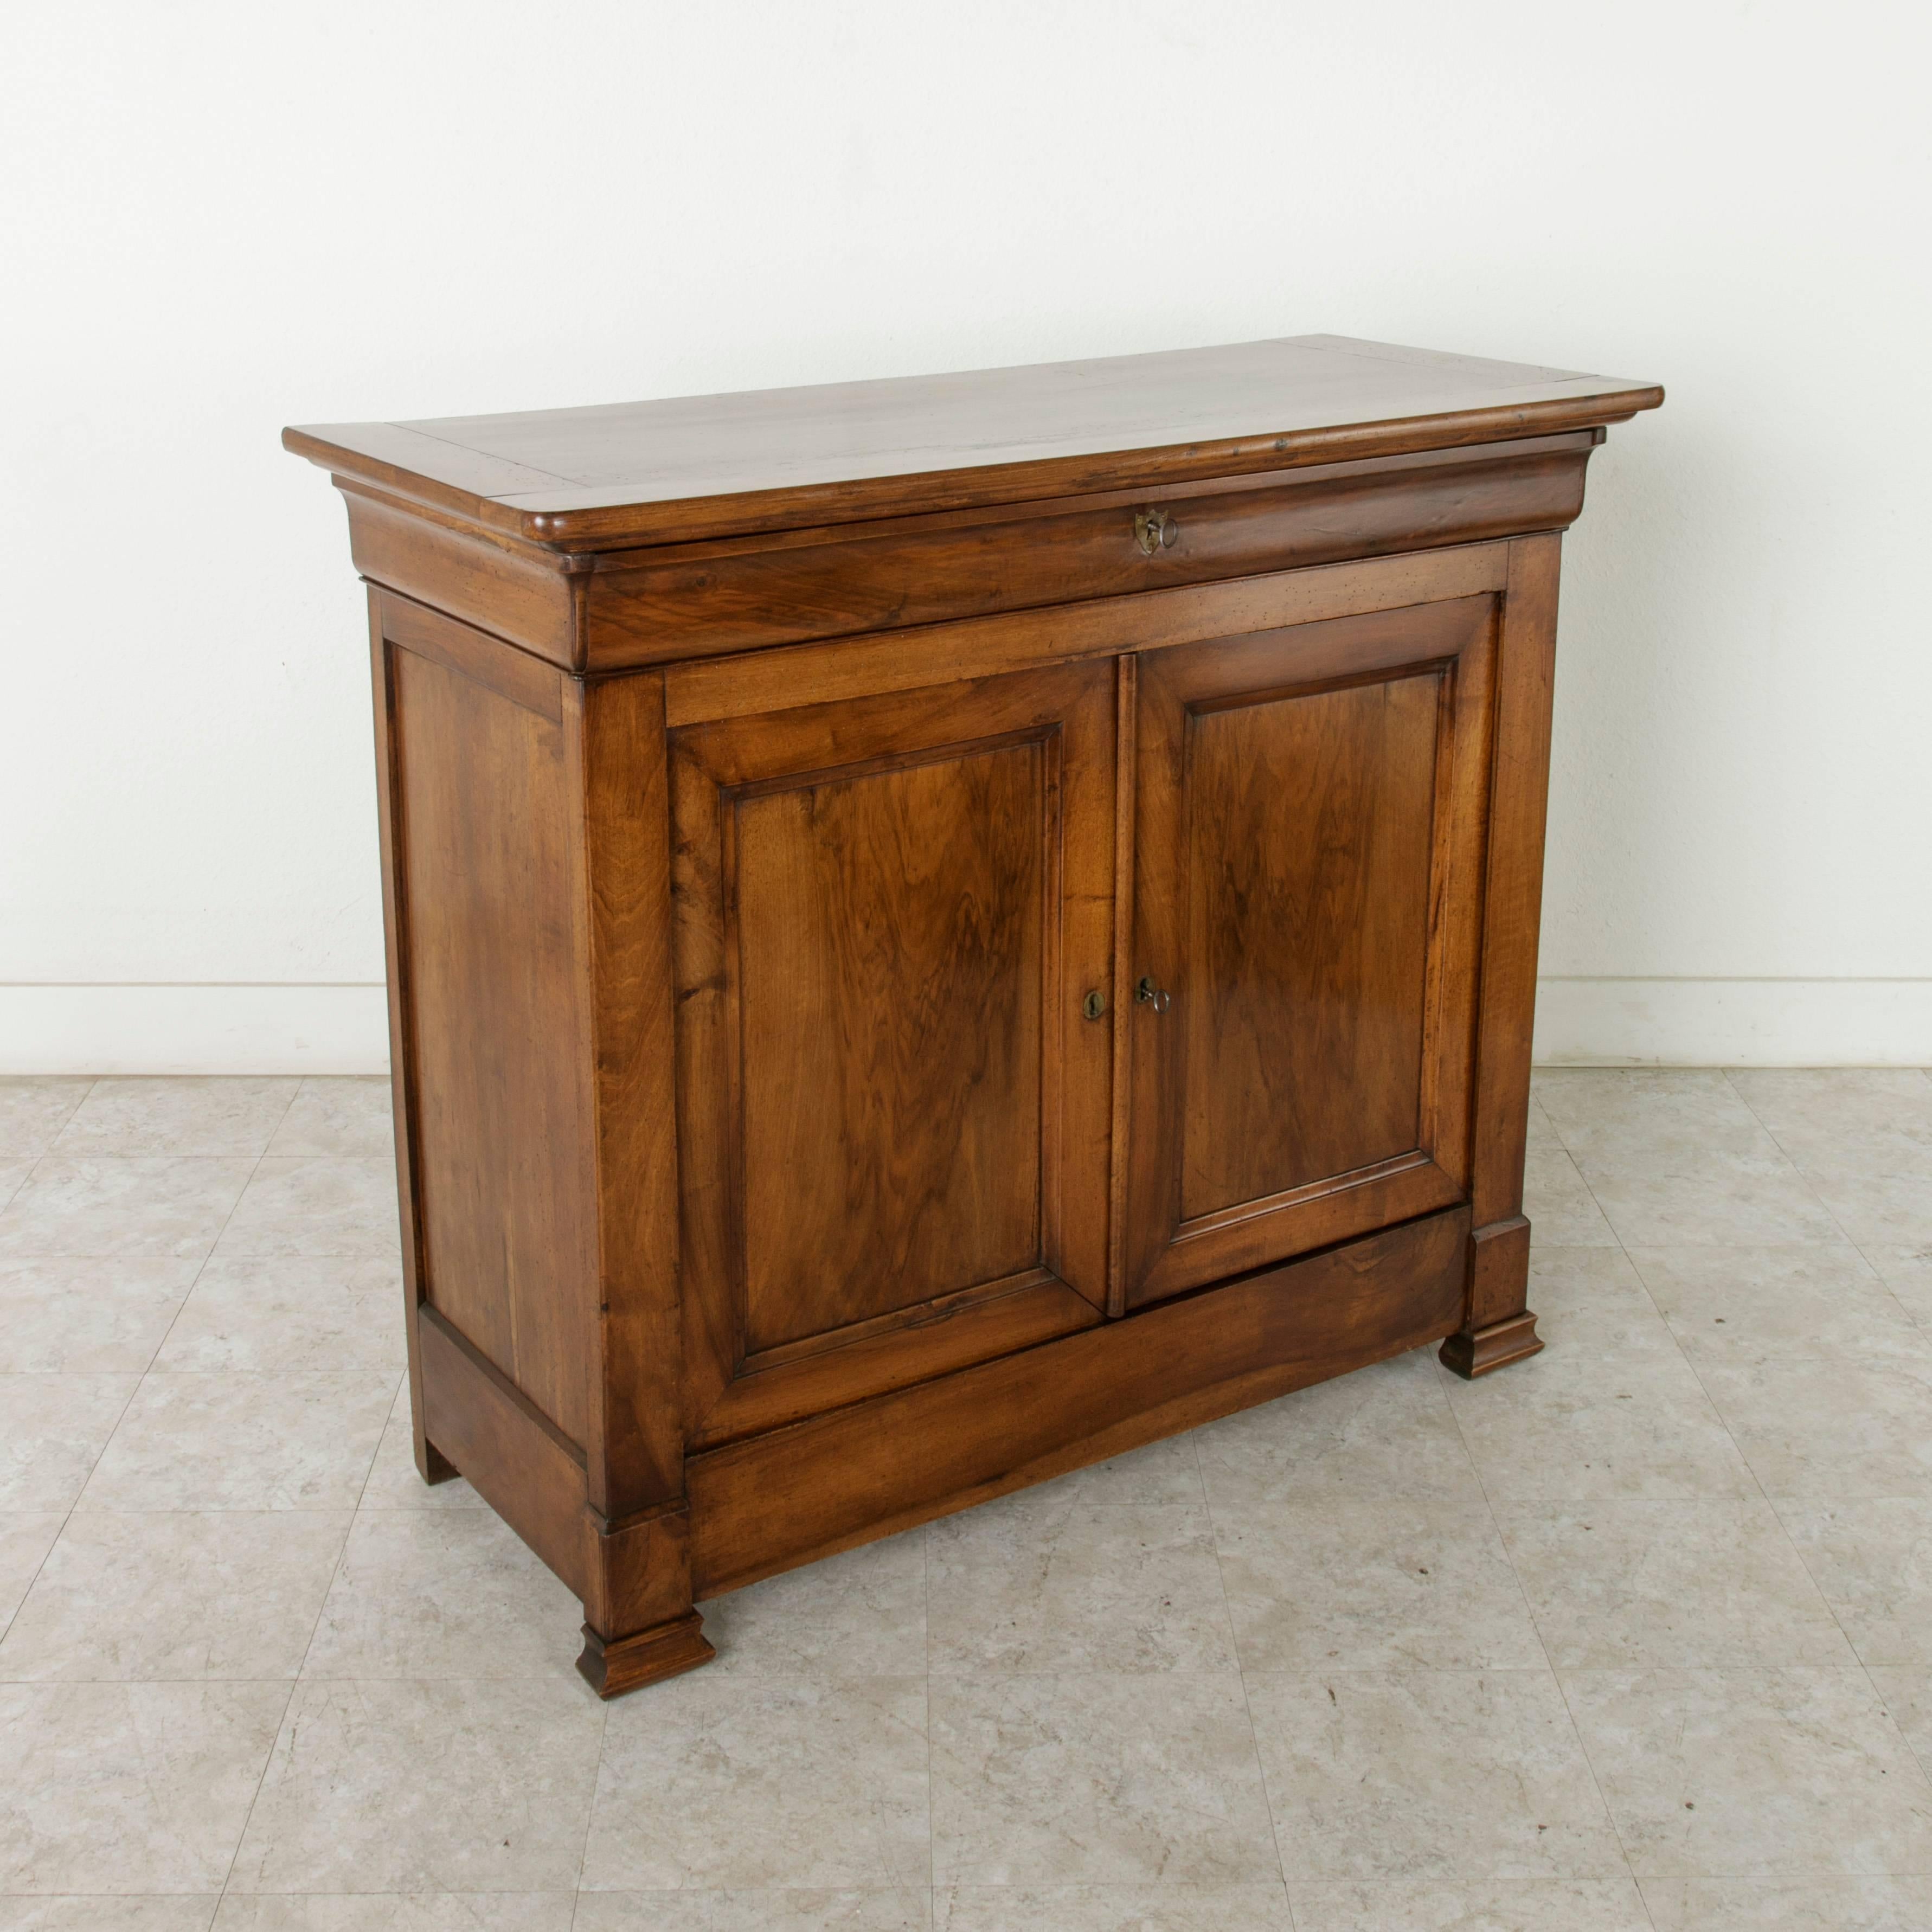 Known as a buffet d'appui in French due to its unusually tall height of 46 inches at which one can lean an elbow, this 19th century Louis Philippe period buffet is constructed of solid walnut. It features a single upper drawer and two lower doors